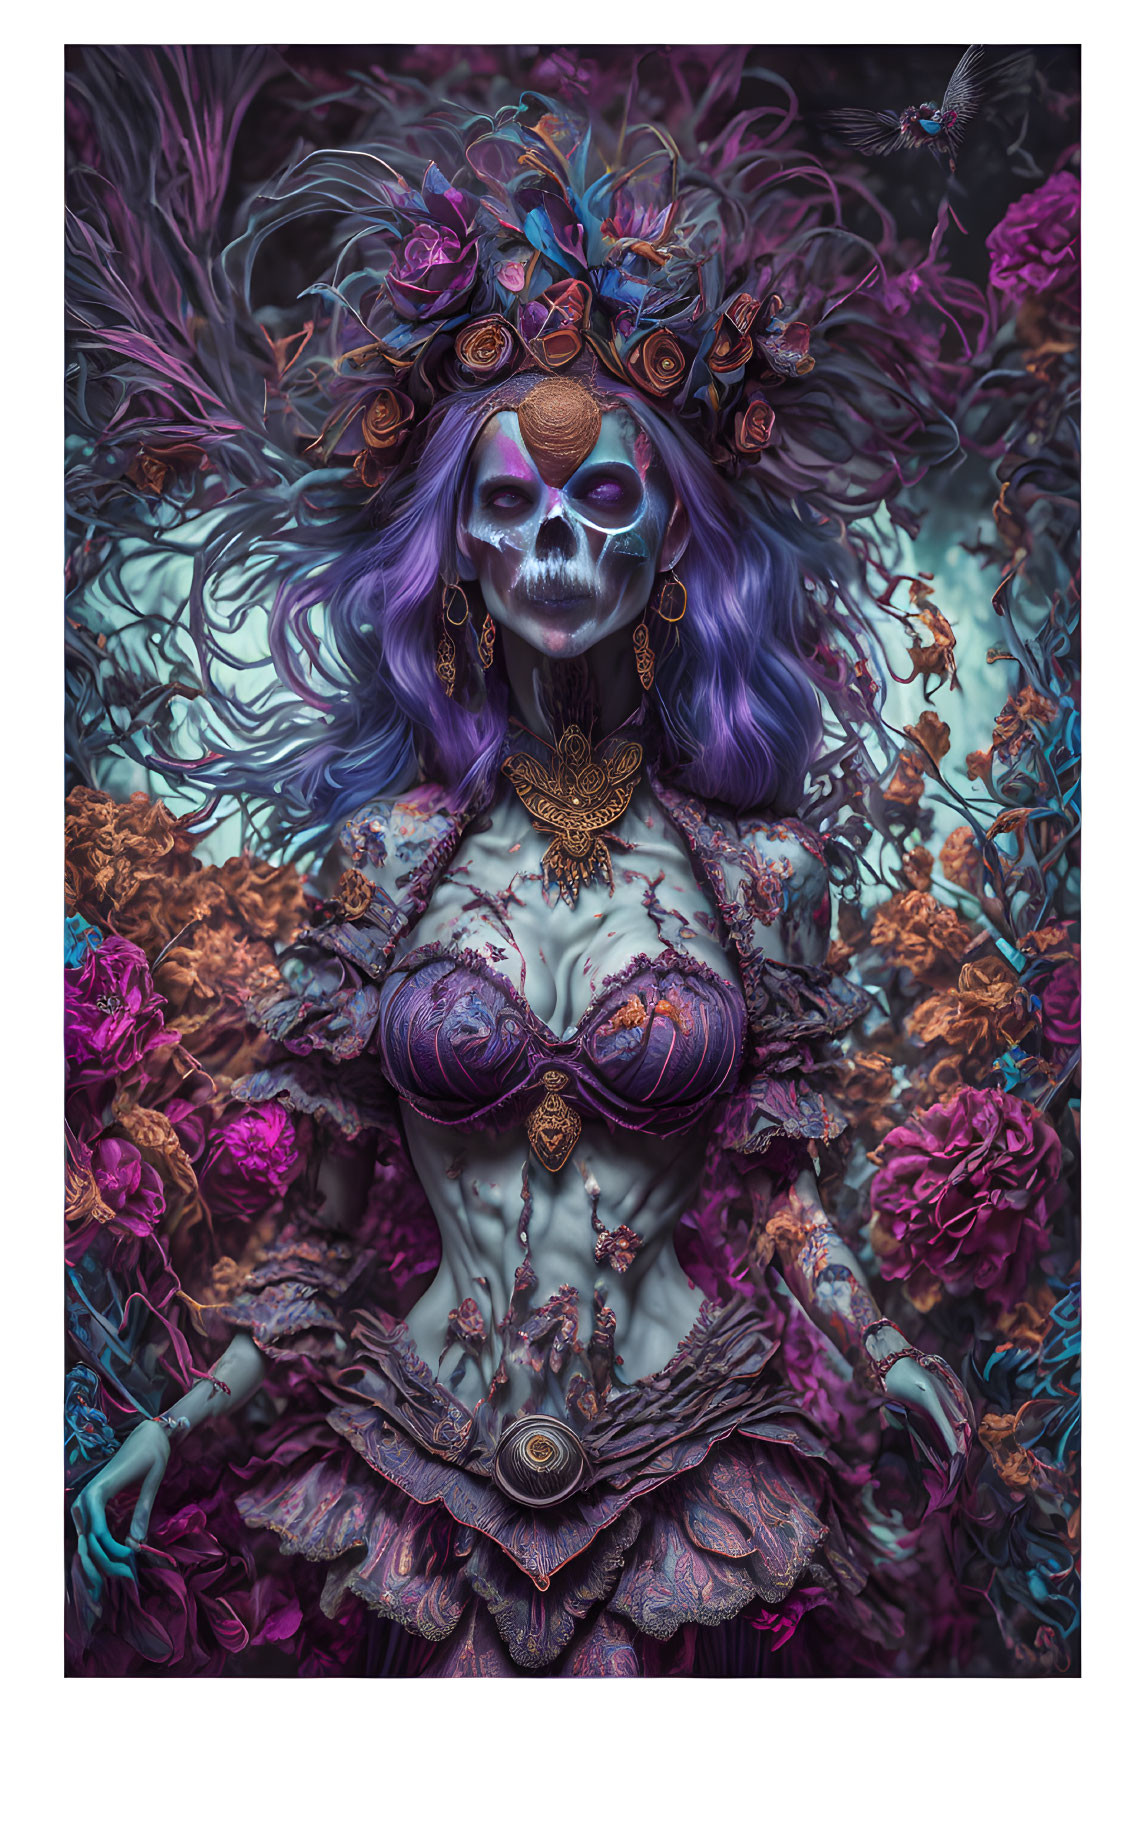 Colorful Dia de los Muertos themed artwork with figure in skeleton makeup and floral patterns